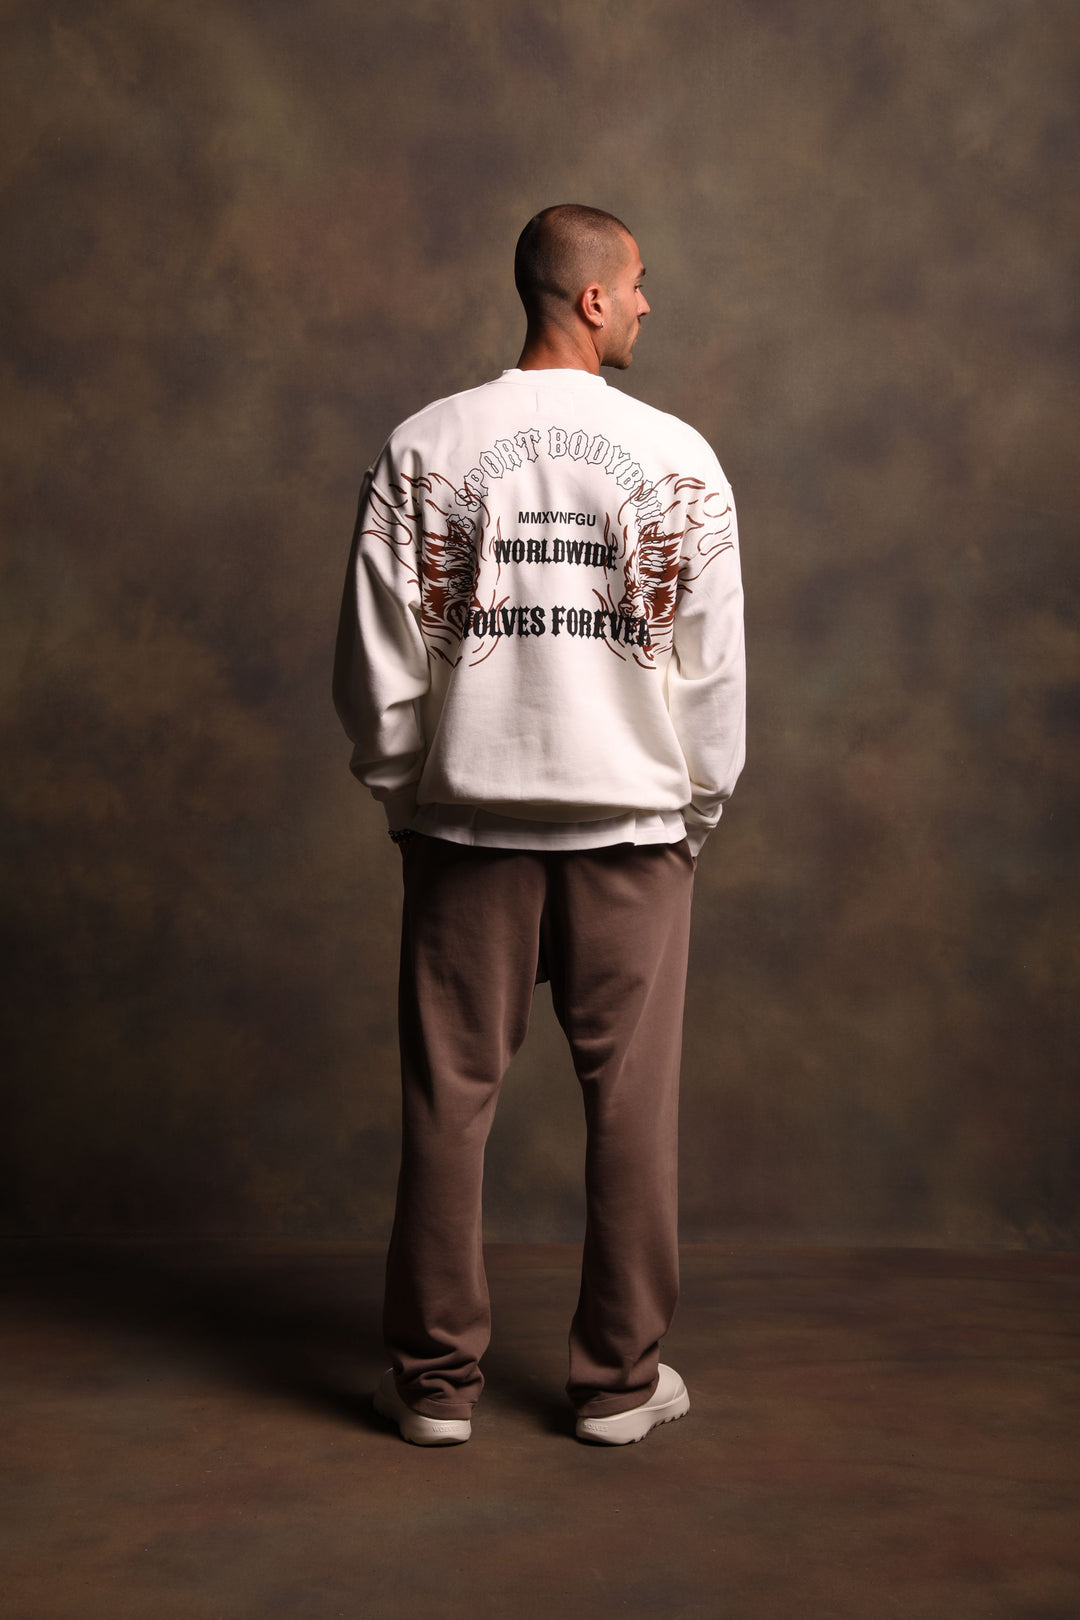 The One You Feed "Vintage London" Crewneck in Cream